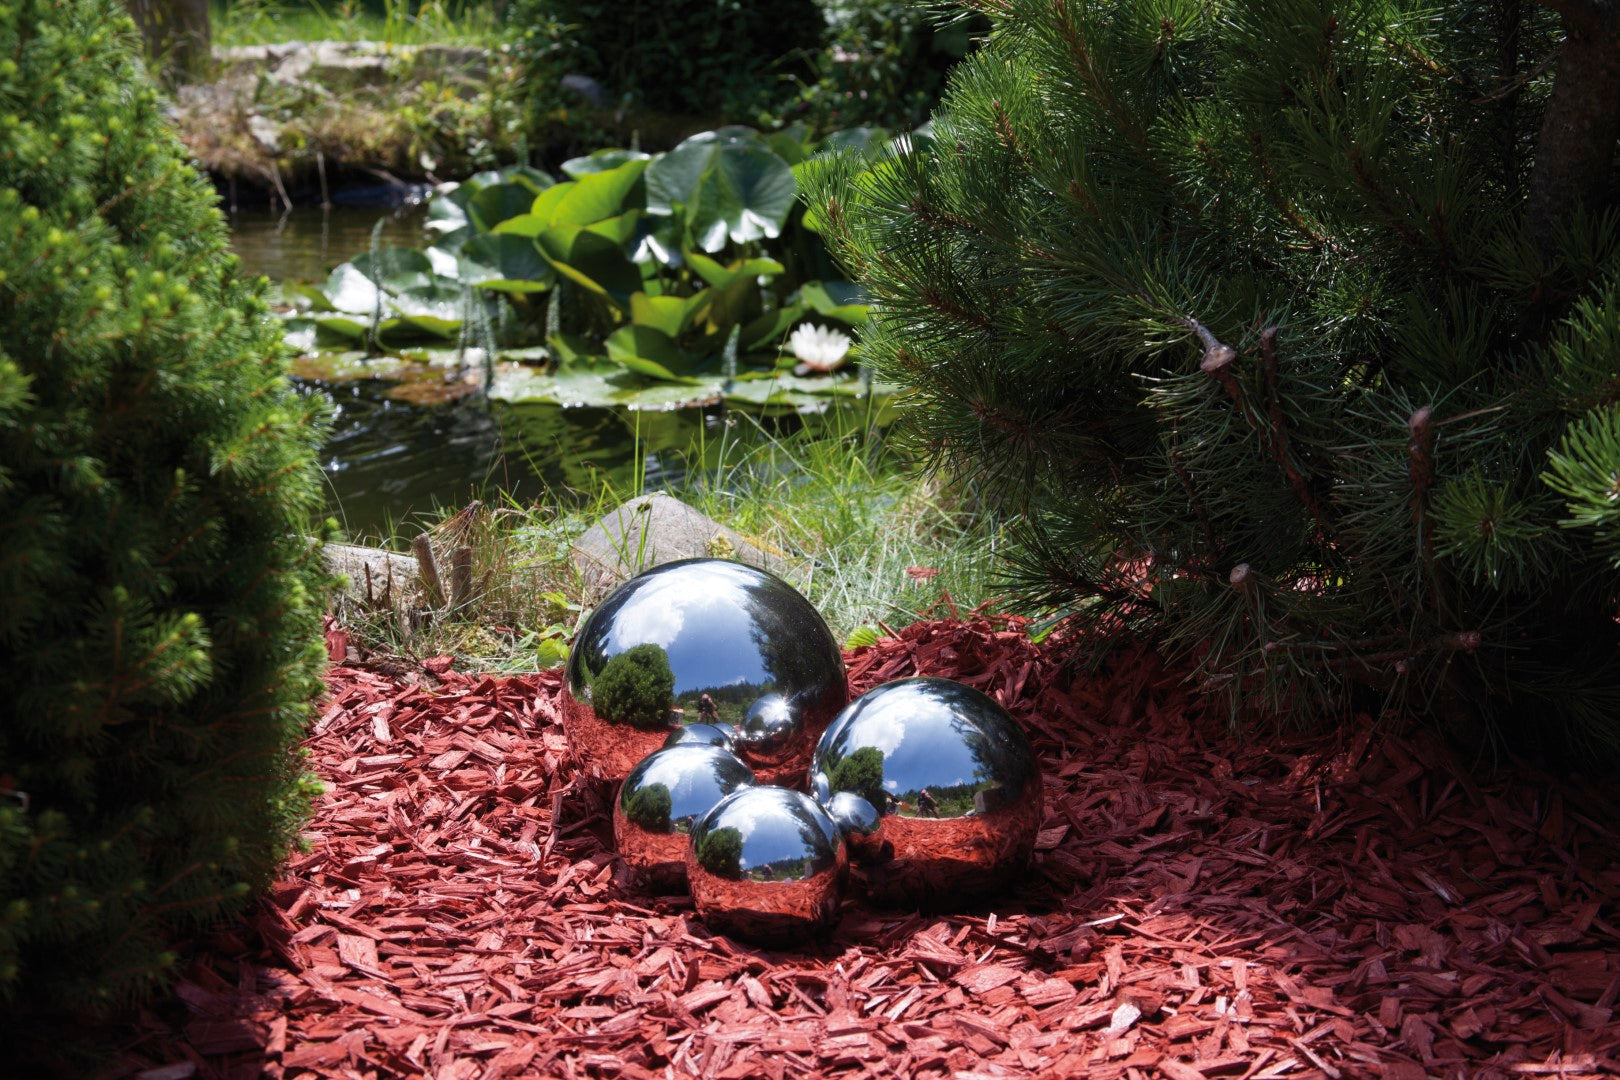 Floating balls made of polished stainless steel